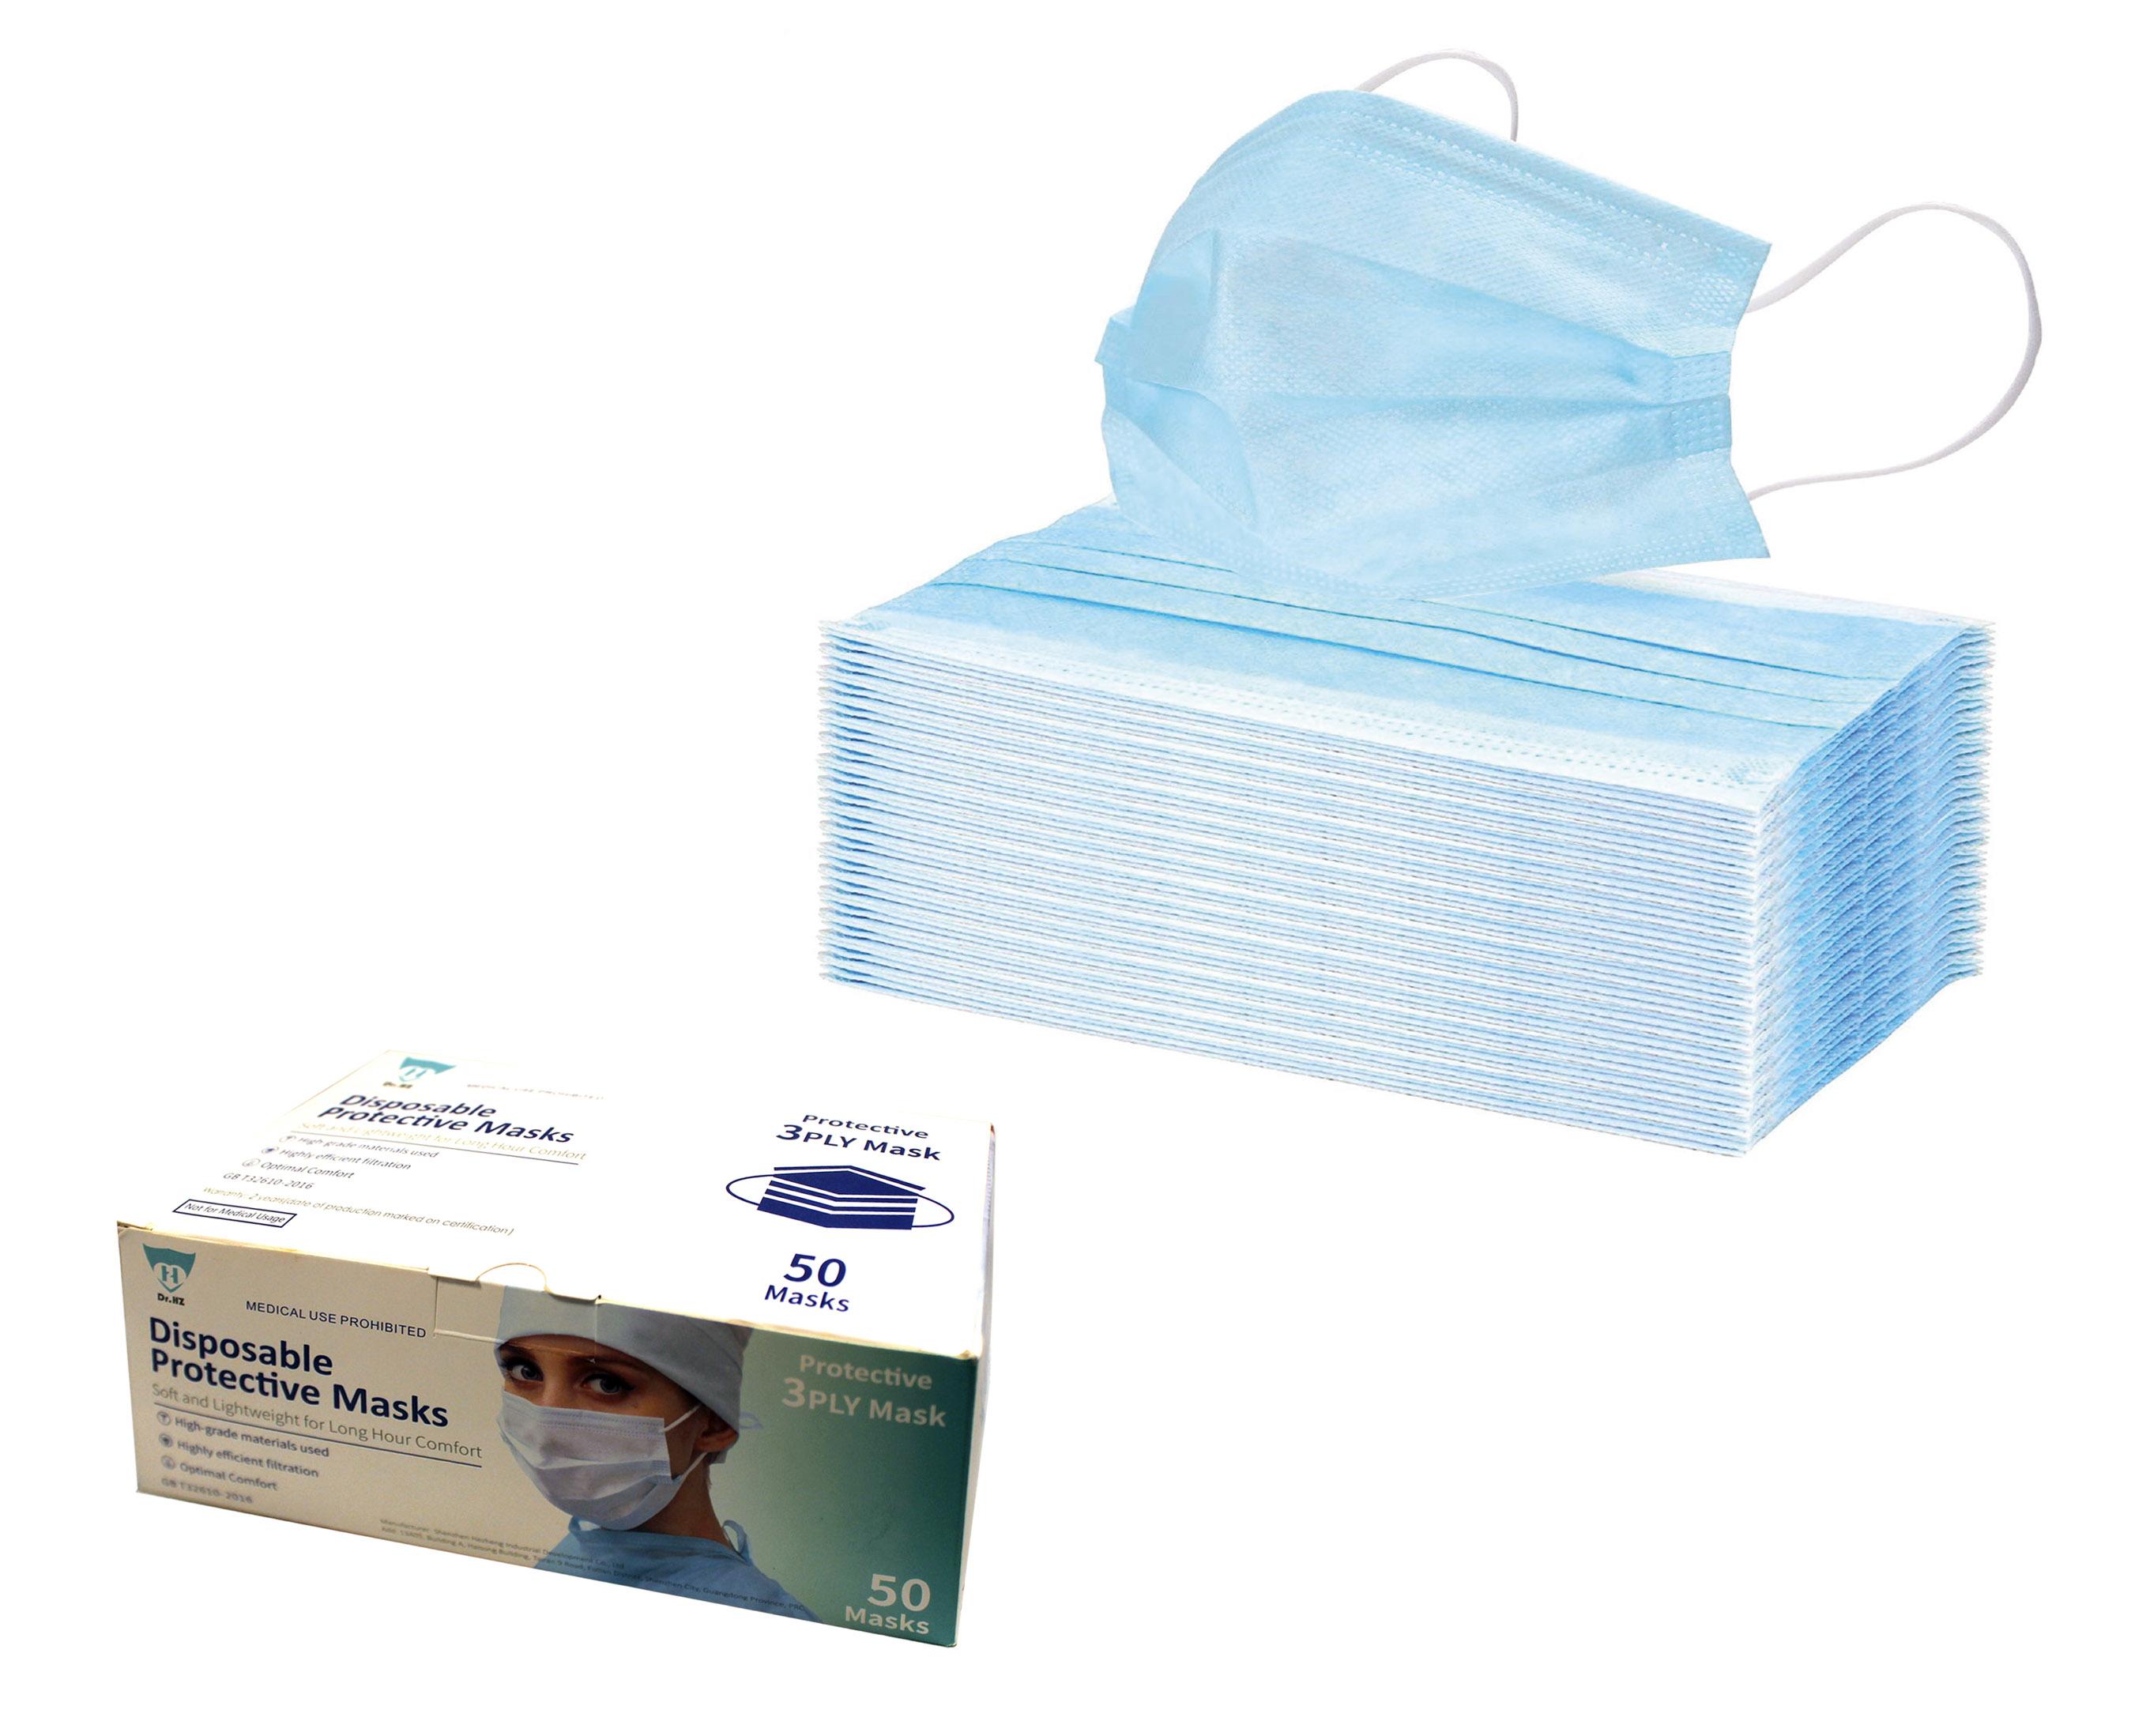 disposable face masks box and stacked neatly